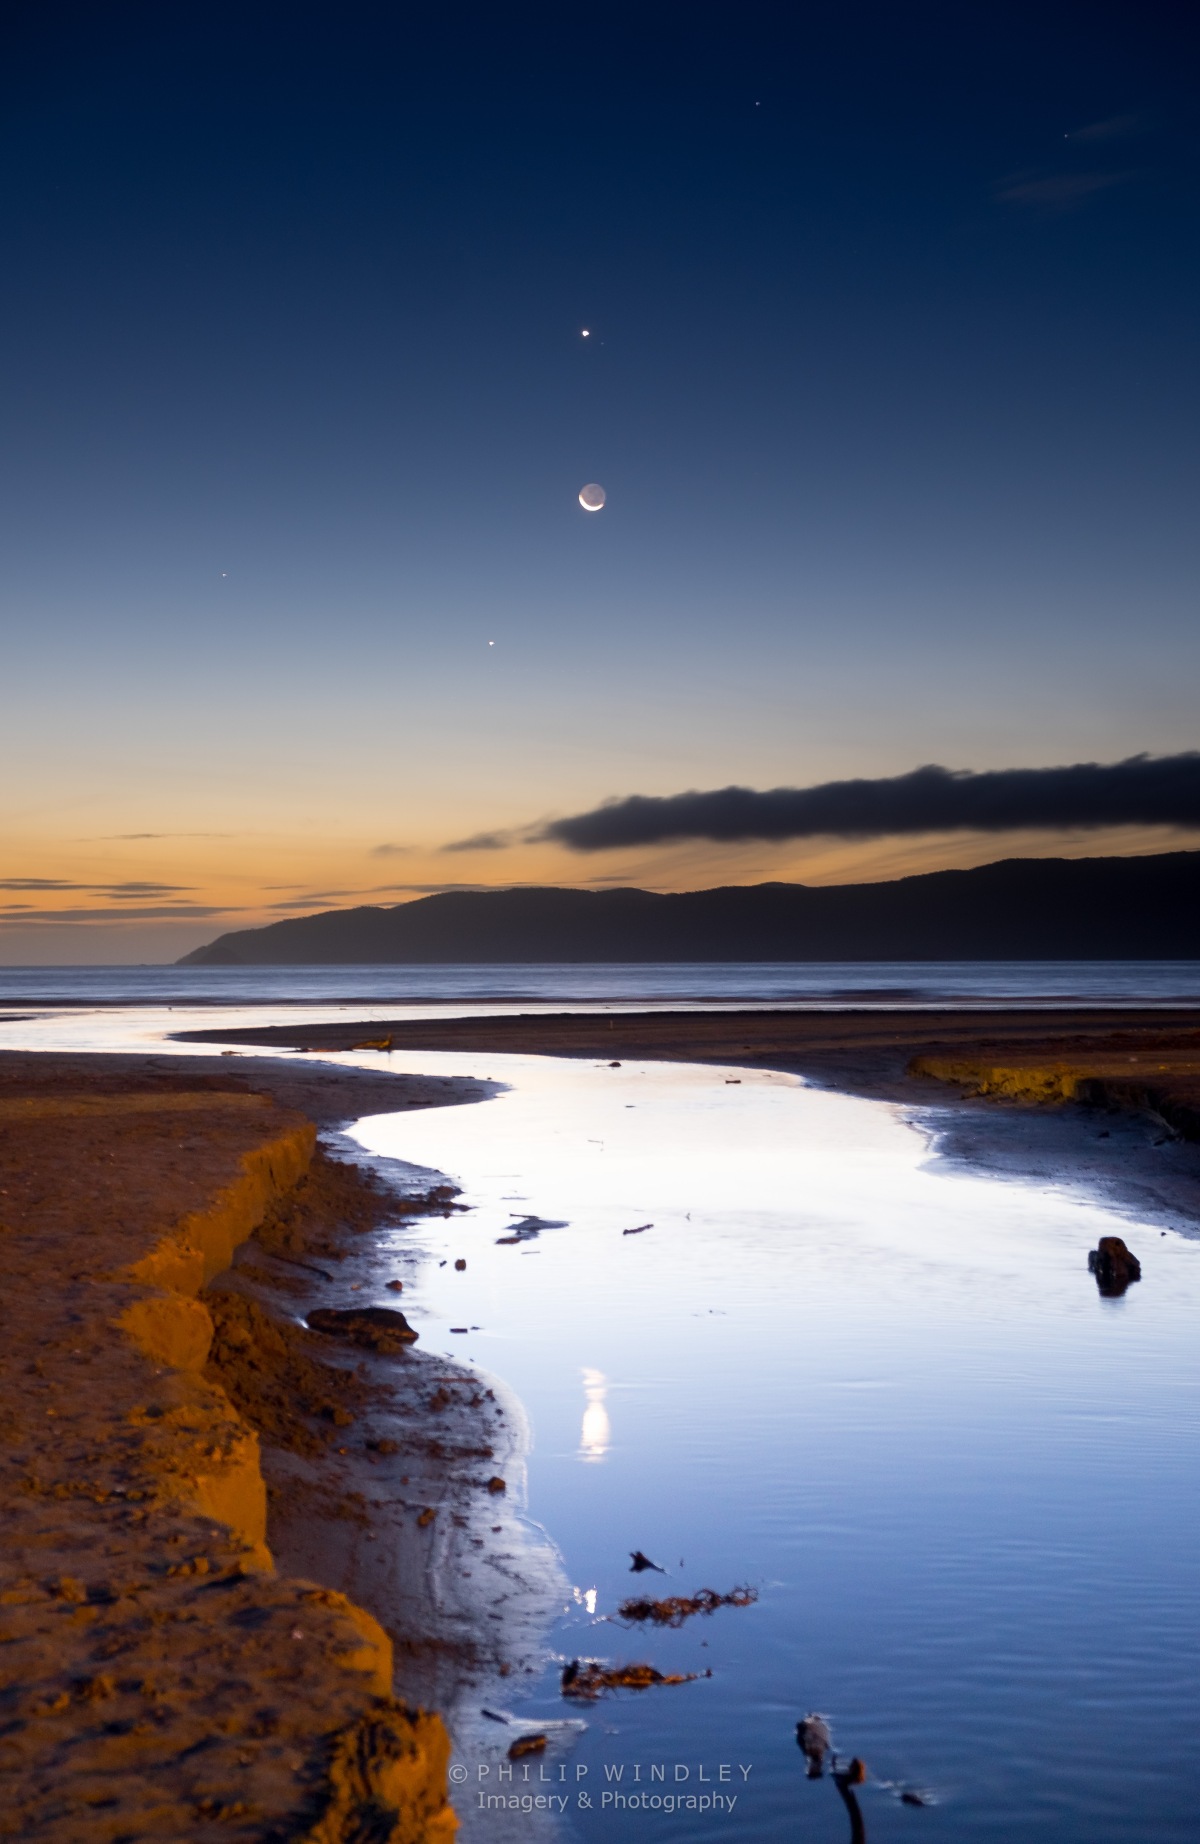 Photographing The Unknown – How I managed to photograph, the Moon, Venus, Jupiter and Mercury, without knowing it.